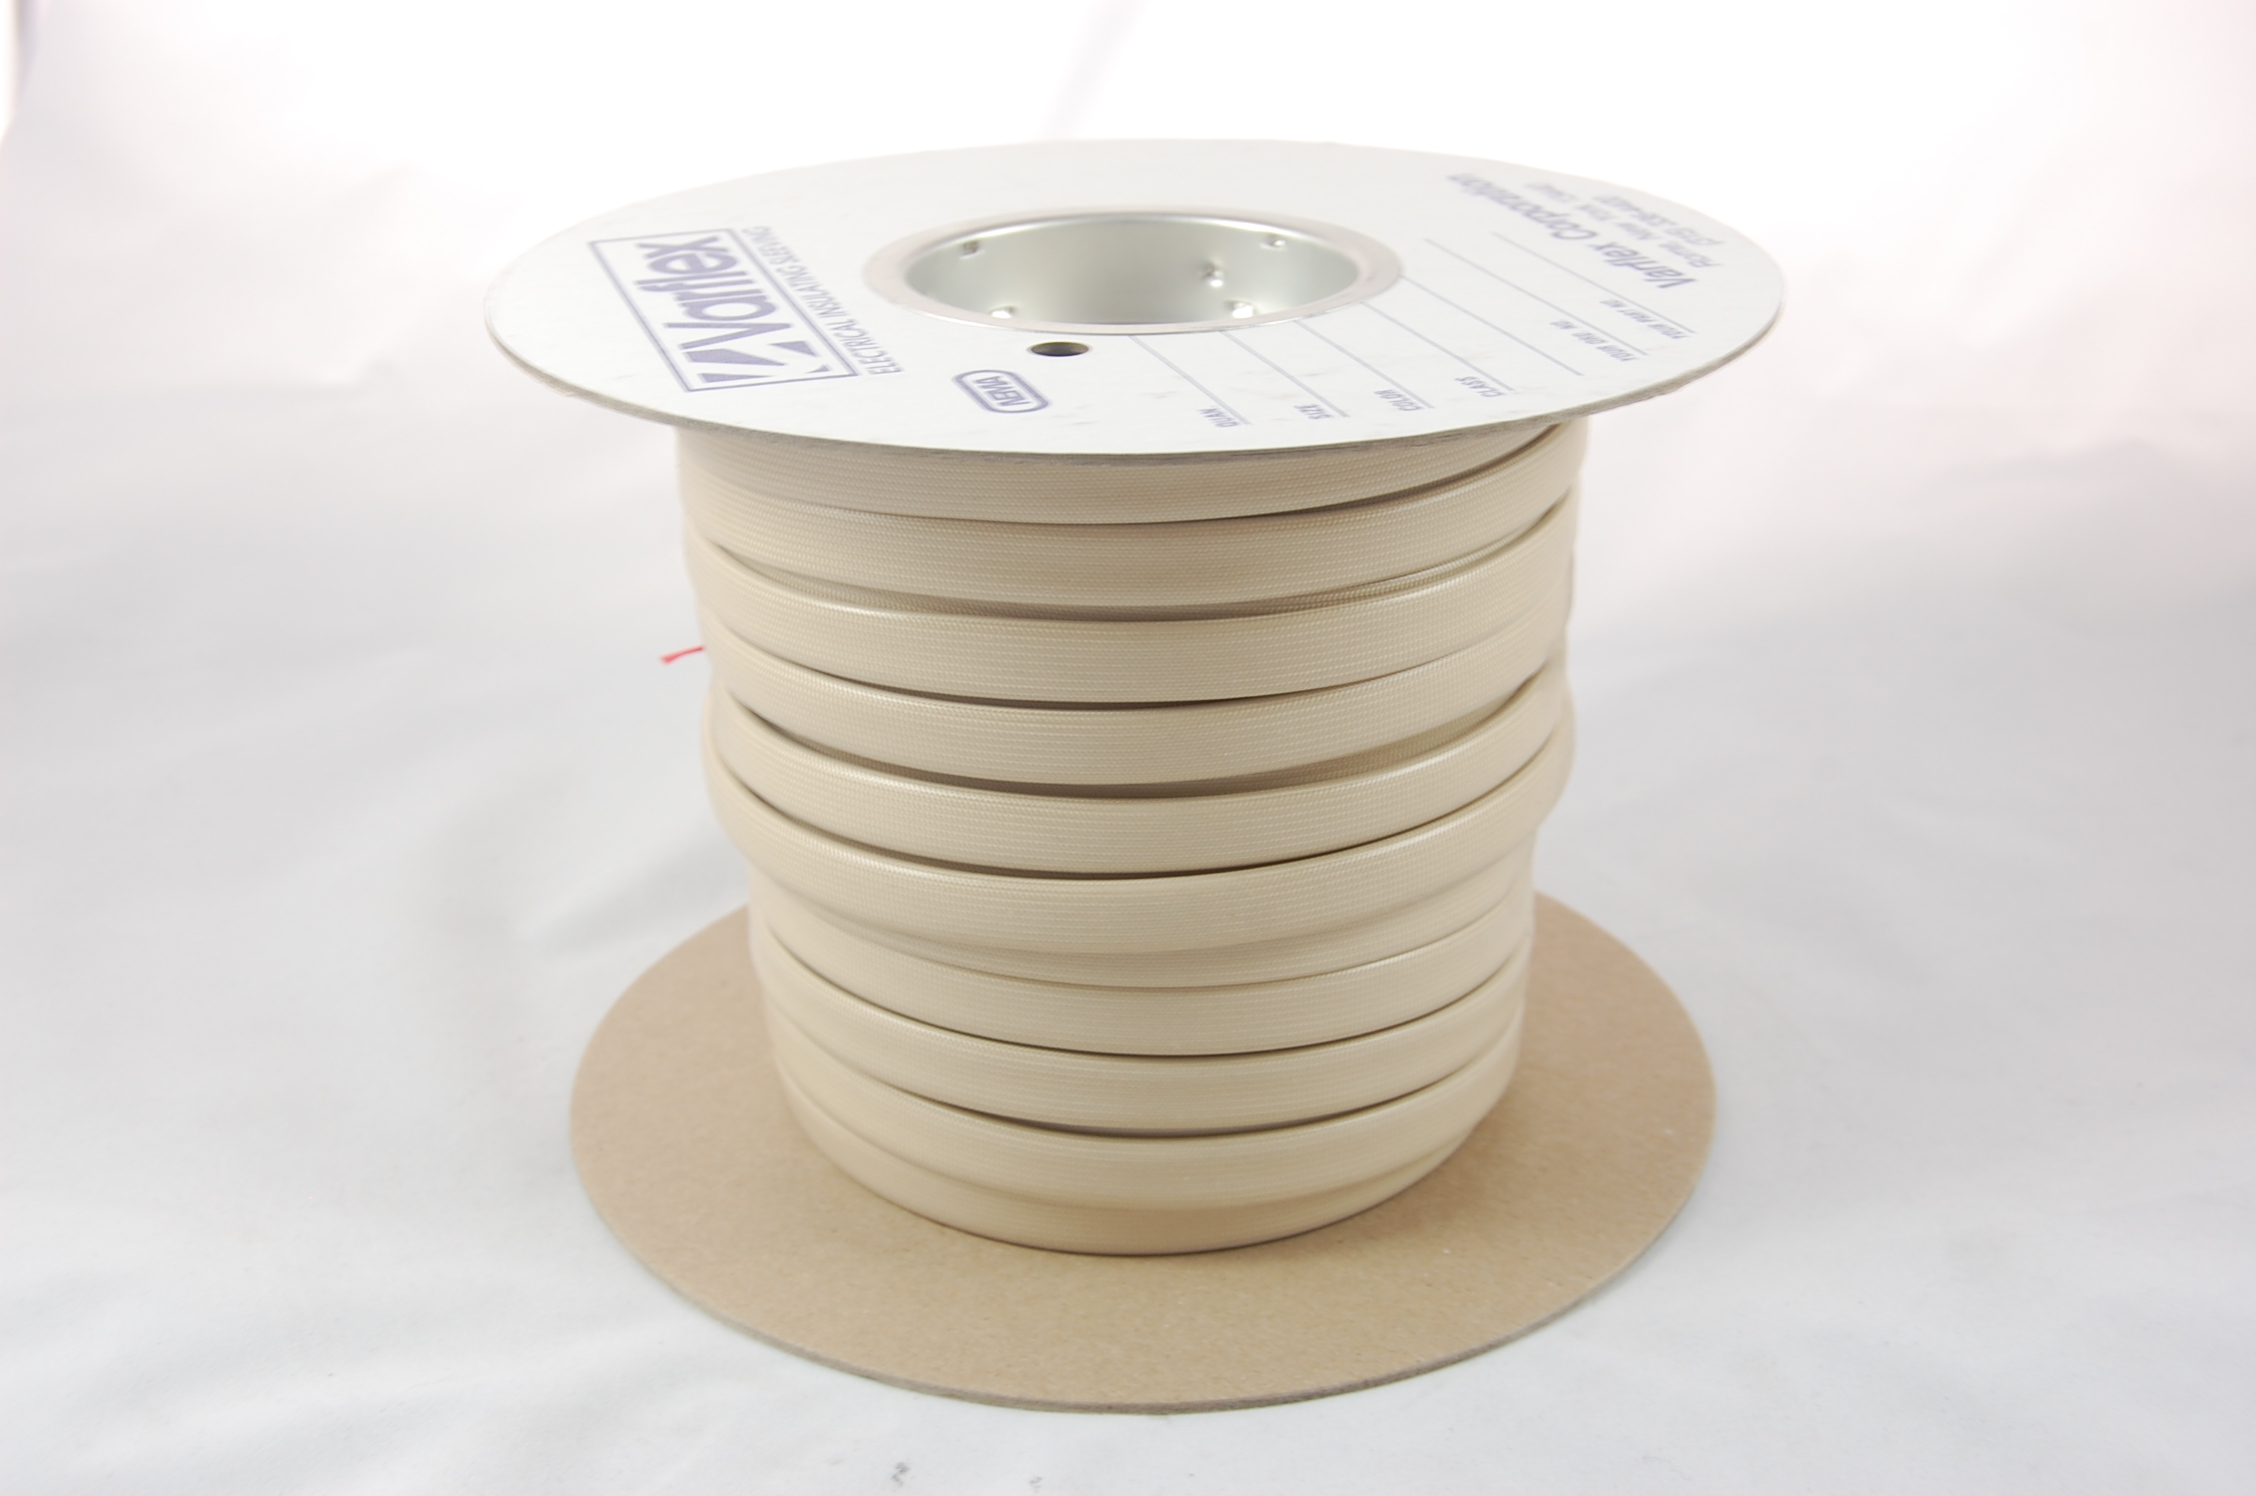 3/4" AWG Varglas Silicone Rubber Grade H-A-1 (8000V) High Temperature Silicone Rubber Coated Braided Fiberglass Sleeving 200°C, natural, 100 FT per spool